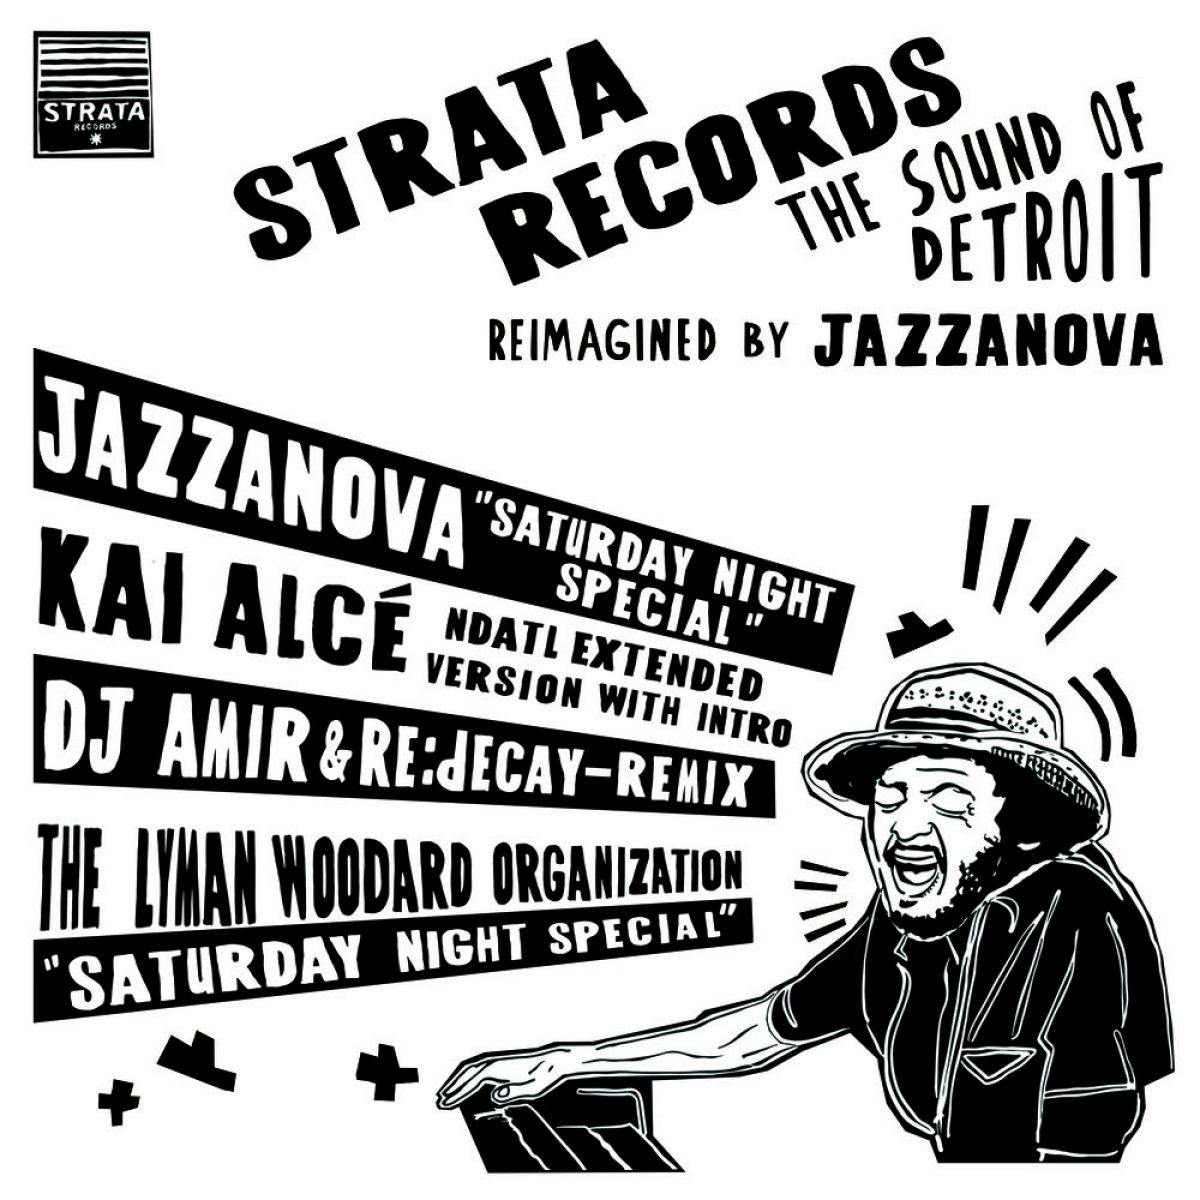 The second single to be pulled from upcoming BBE album ‘Strata Records – The Sound of Detroit – Reimagined By Jazzanova’, ‘Saturday Night Special’ features remixes by Kai Alcé and DJ Amir & Re.decay, as well as The Lyman Woodard Organization’s 1975 original.